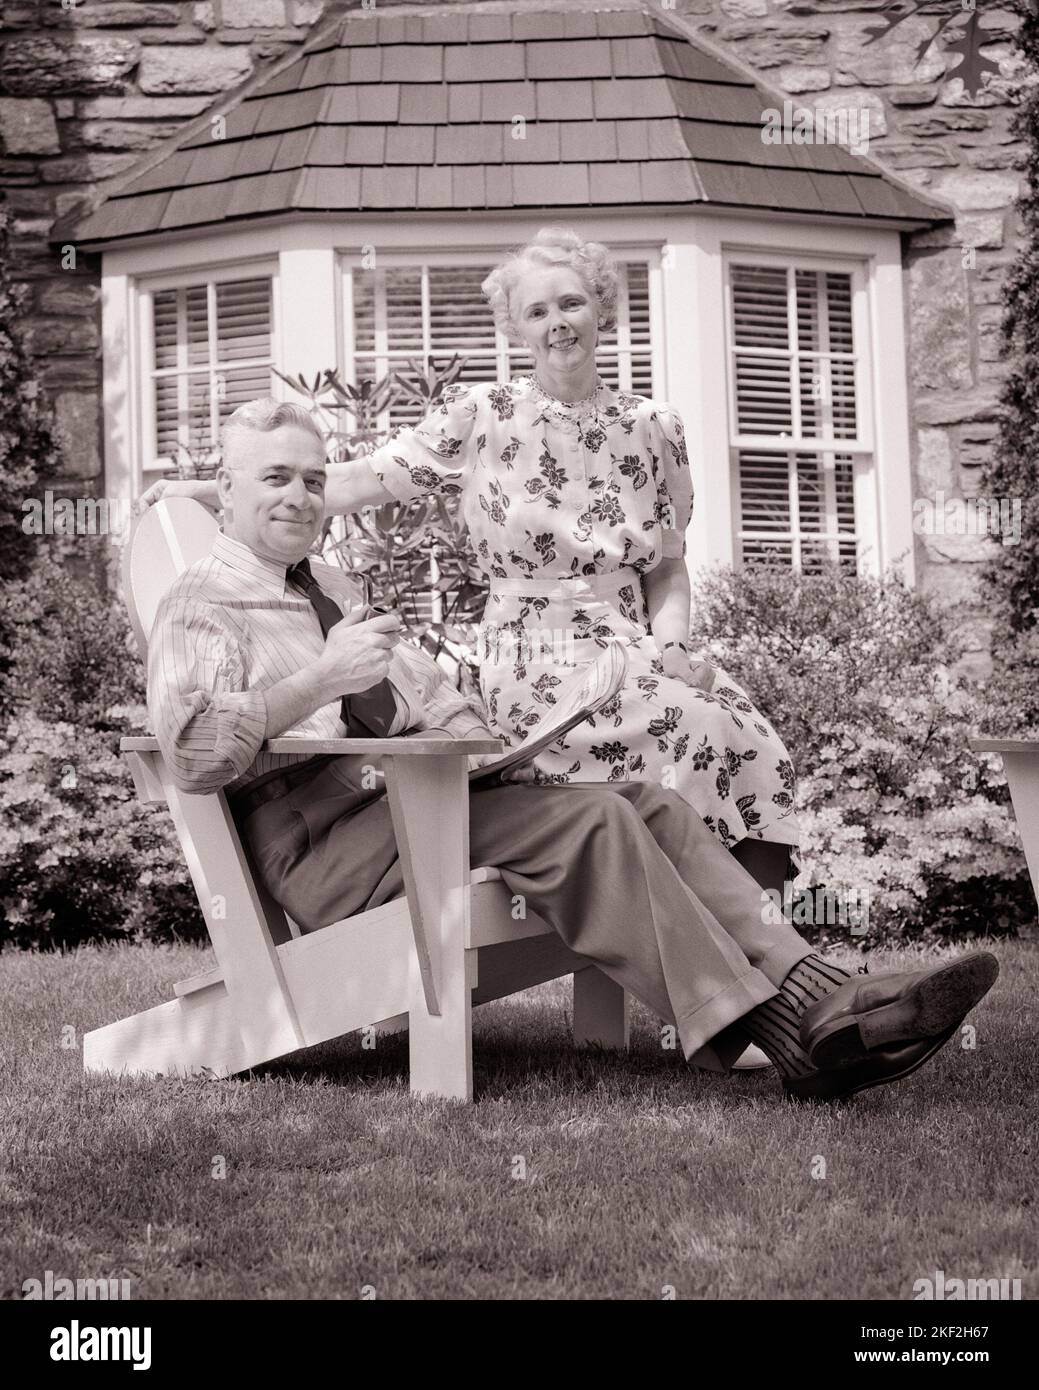 1940s PORTRAIT SENIOR COUPLE SITTING ADIRONDACK STYLE CHAIR ON FRONT LAWN STONE HOME WITH BAY WINDOW SMILING LOOKING AT CAMERA - s9435 HAR001 HARS DESIGN PLEASED JOY LIFESTYLE SATISFACTION ARCHITECTURE ELDER HOUSES PIPE BAY HEALTHINESS HOME LIFE LUXURY COPY SPACE FRIENDSHIP HALF-LENGTH RESIDENTIAL BUILDINGS RETIREMENT CONFIDENCE SENIOR MAN SENIOR ADULT ADIRONDACK MIDDLE-AGED B&W MIDDLE-AGED MAN SENIOR WOMAN SUCCESS RETIREE STRUCTURE HAPPINESS OLD AGE MIDDLE-AGED WOMAN OLDSTERS CHEERFUL OLDSTER LEISURE EXTERIOR PRIDE HOMES SMILES ELDERS JOYFUL RESIDENCE STYLISH COOPERATION TOGETHERNESS Stock Photo